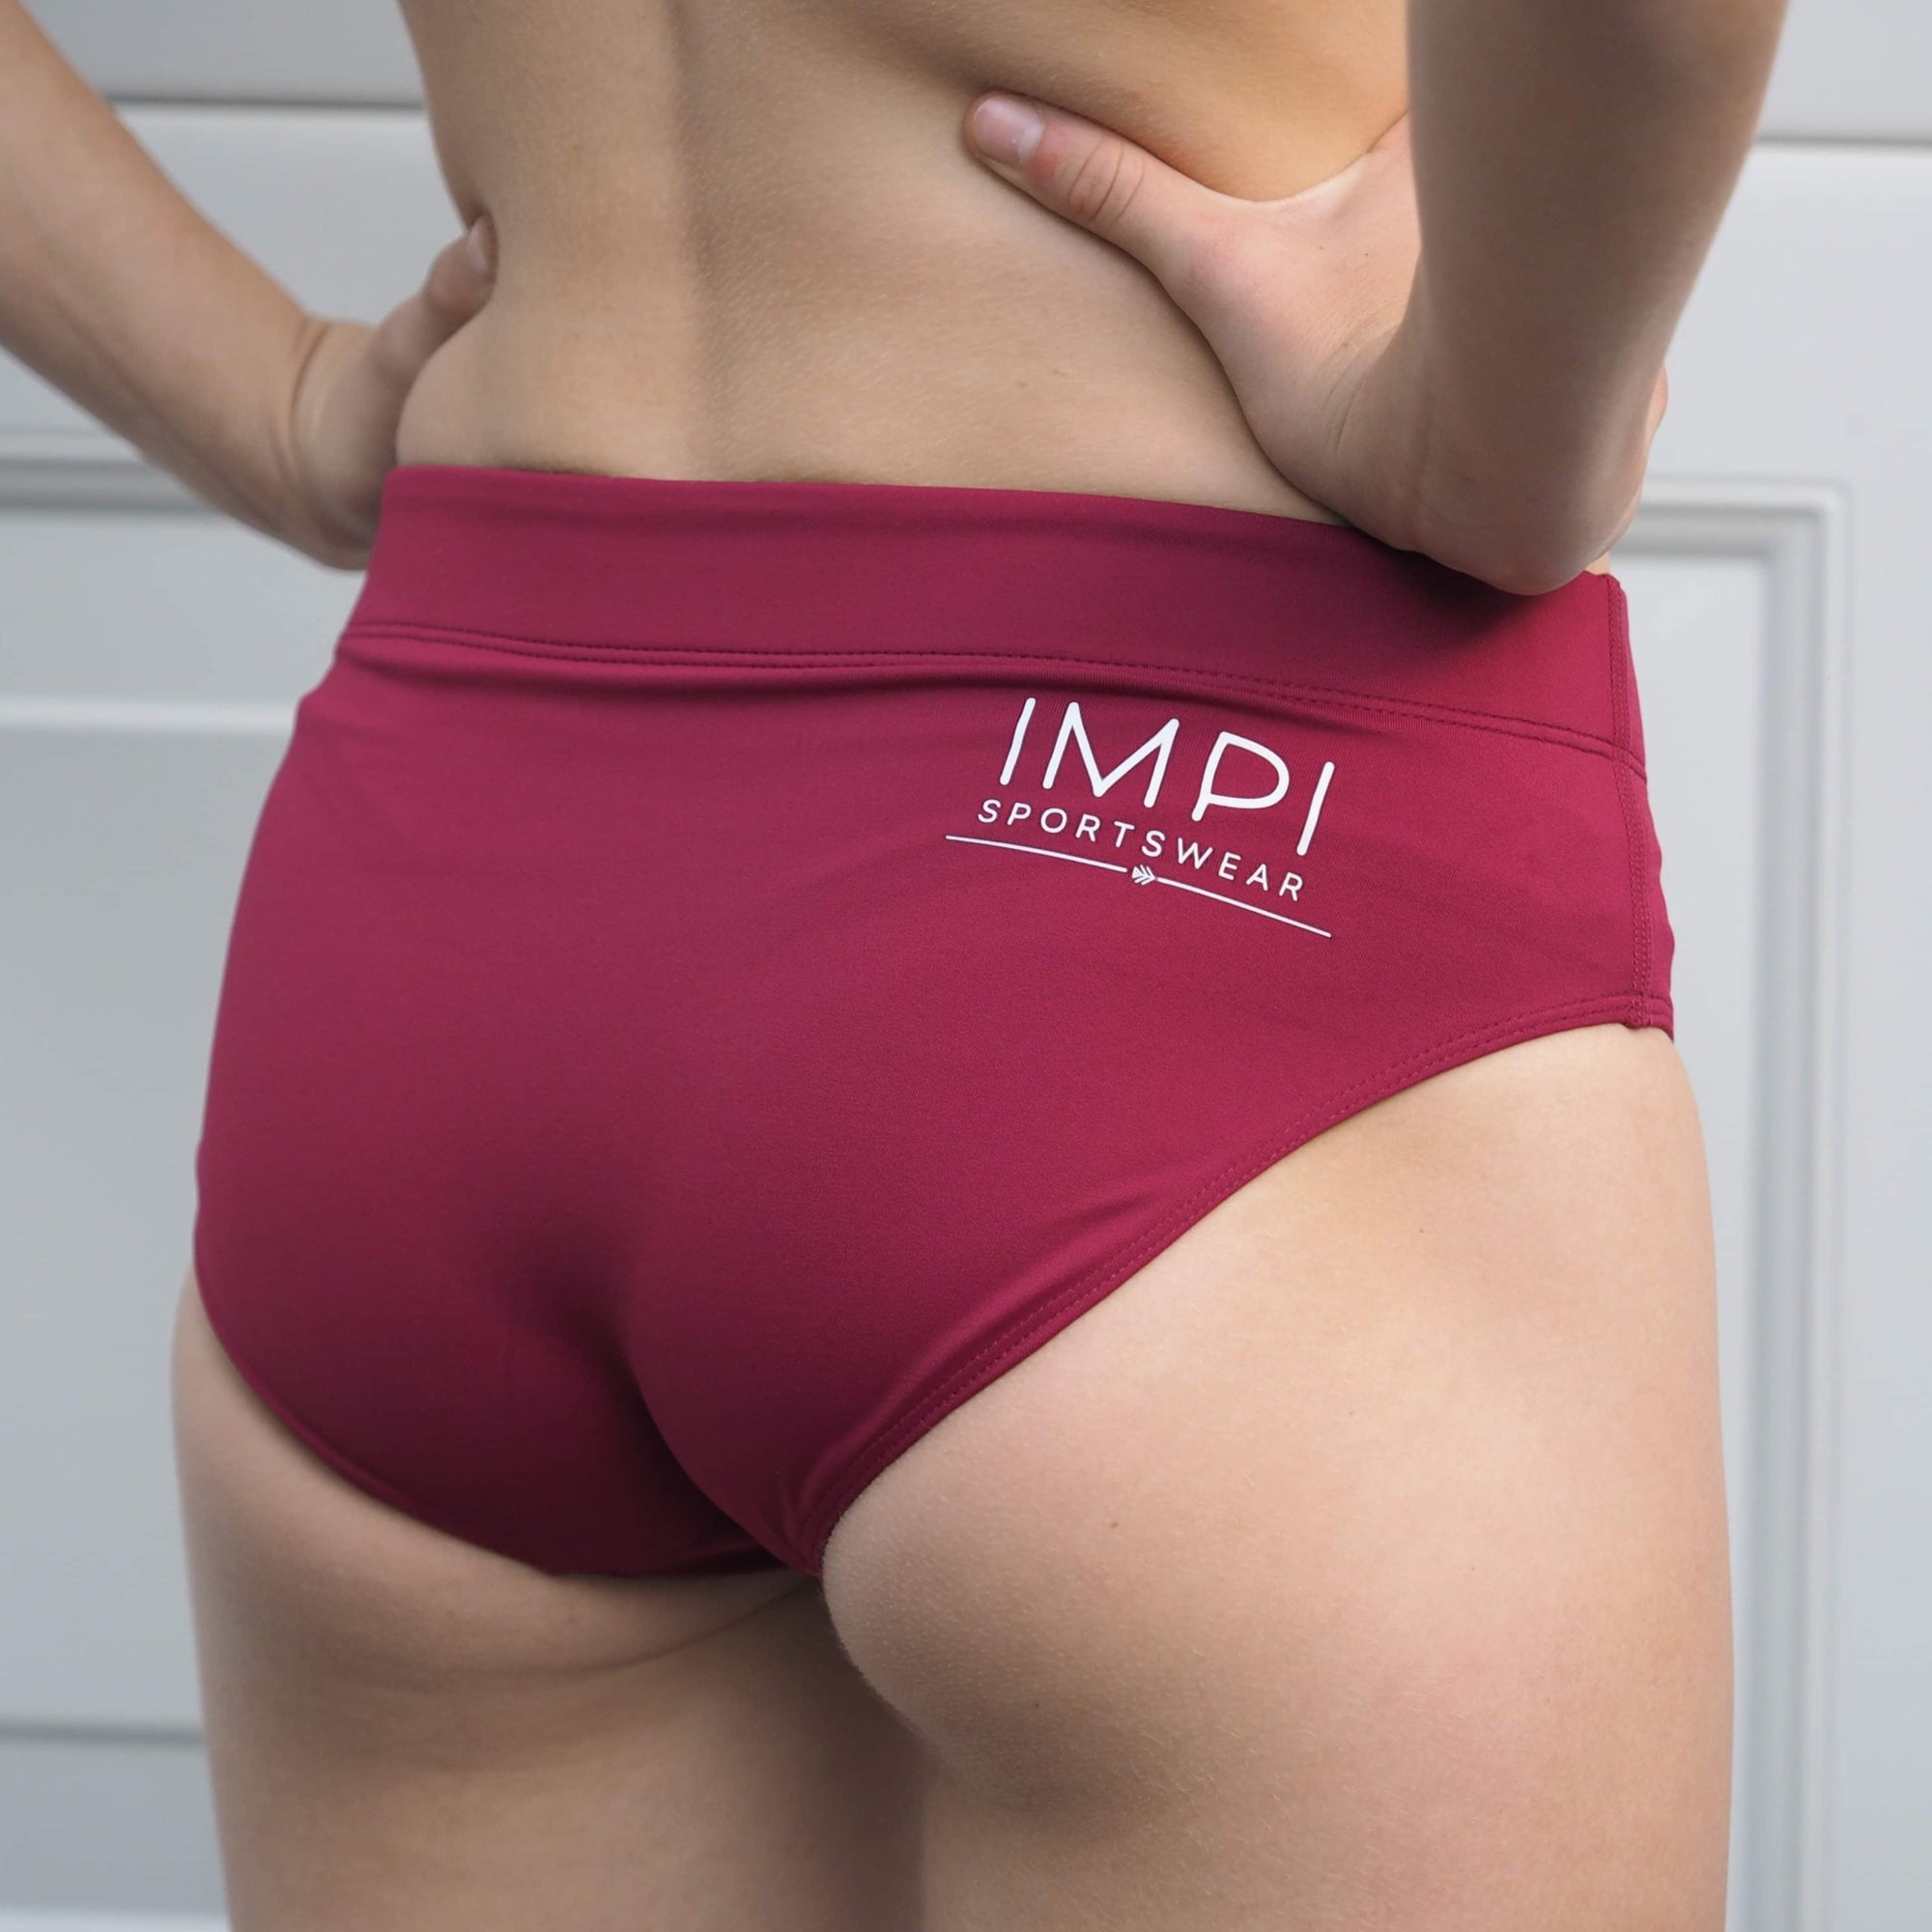 Impi Sportswear - Briefs or Bummers? Let us know in the